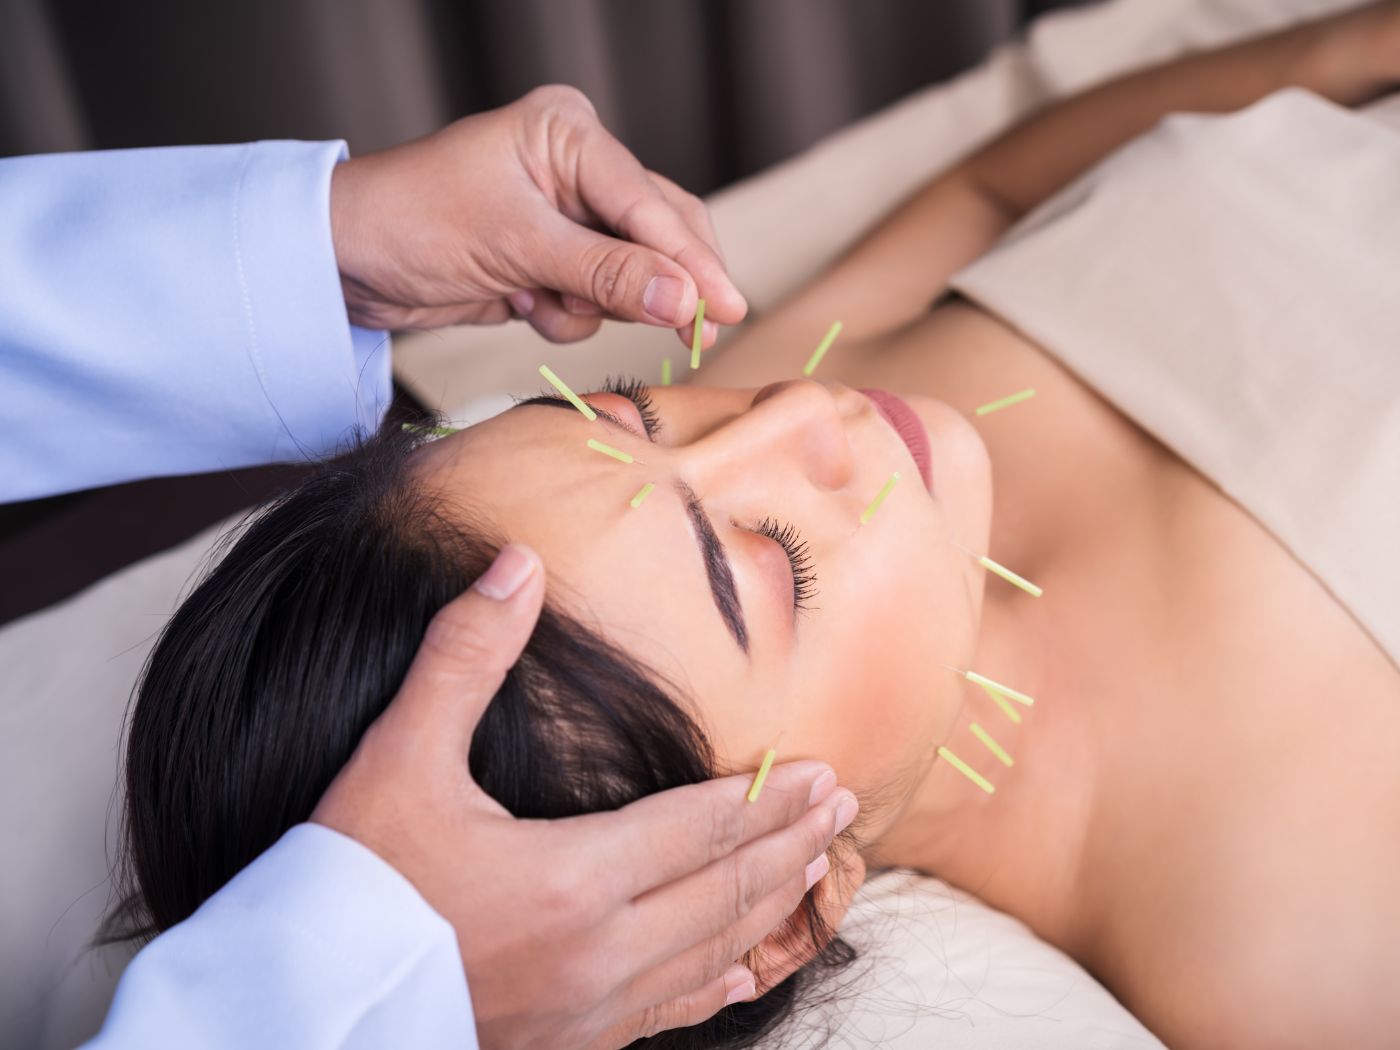 A Complete Guide To Facial Acupuncture